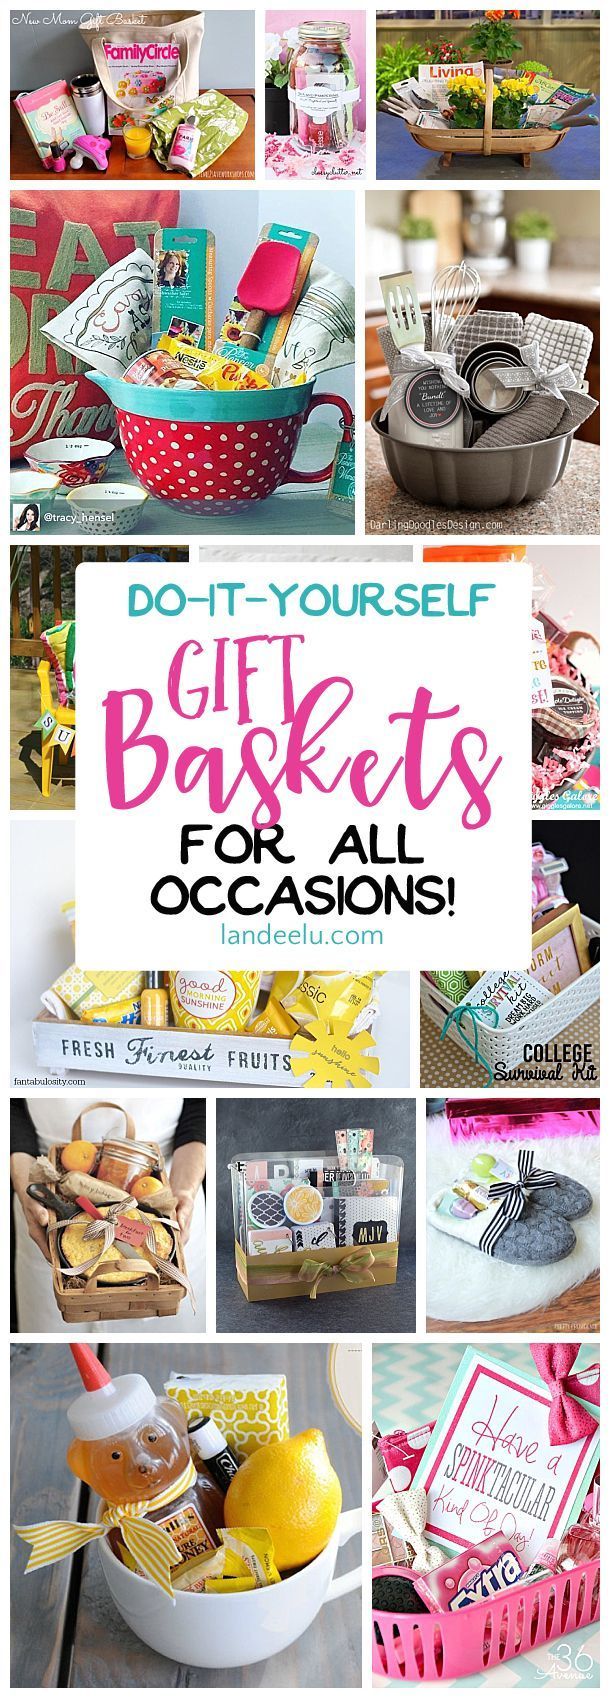 Put together a gift basket for any occasion and make someones day! Easy do it